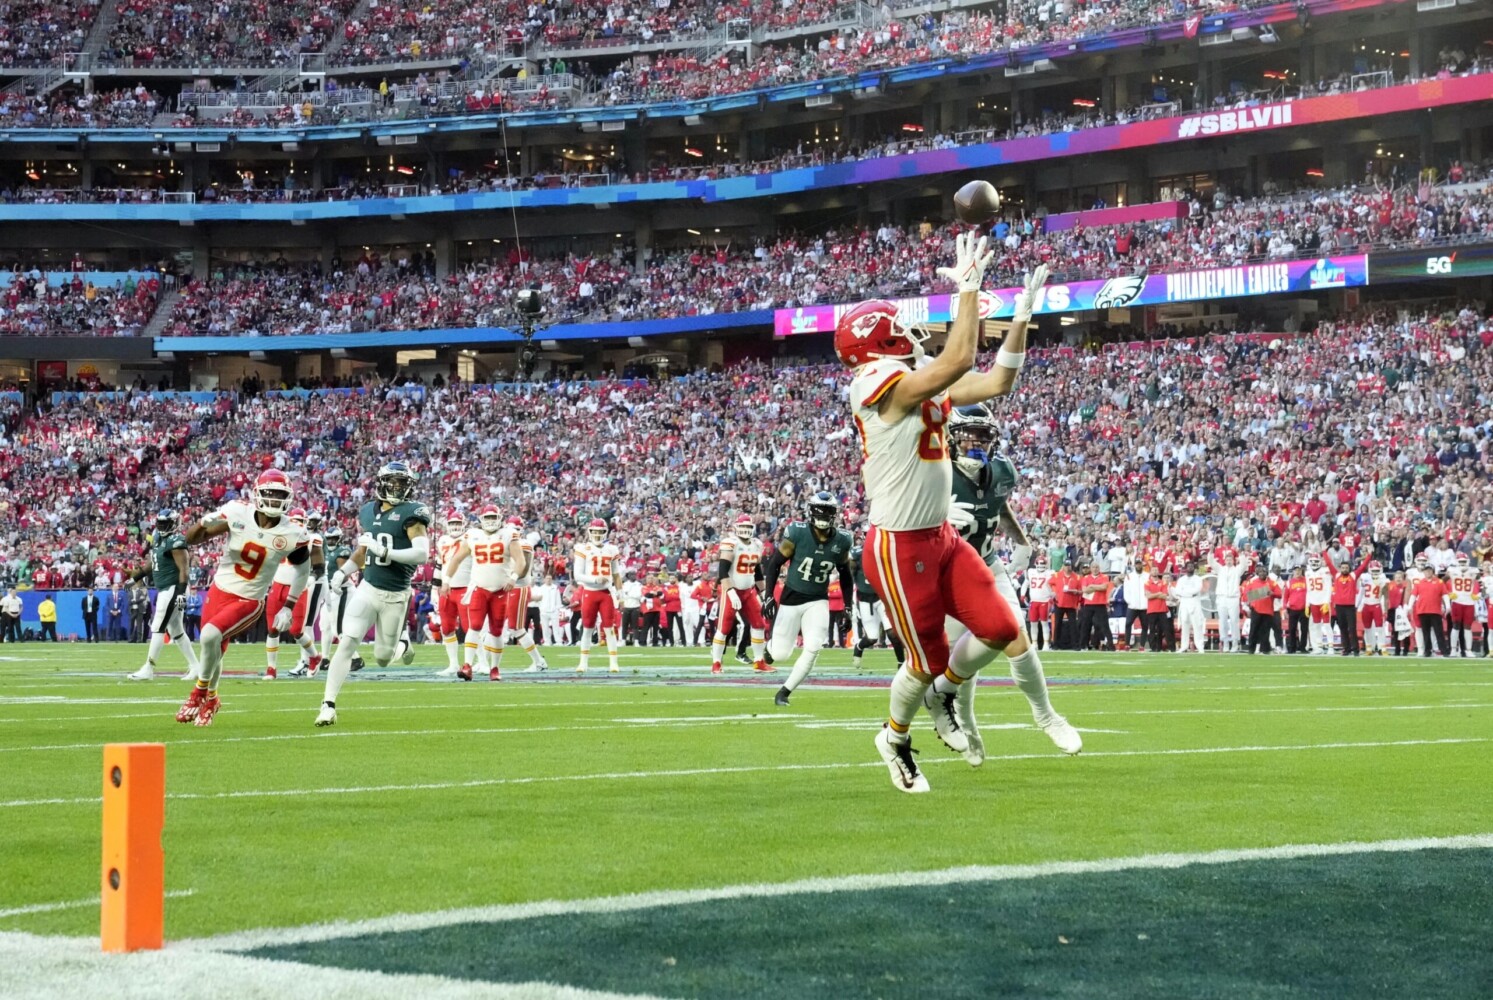 Kansas City Chiefs tight end Travis Kelce scores a touchdown against the Philadelphia Eagles during the first quarter in Super Bowl LVII.